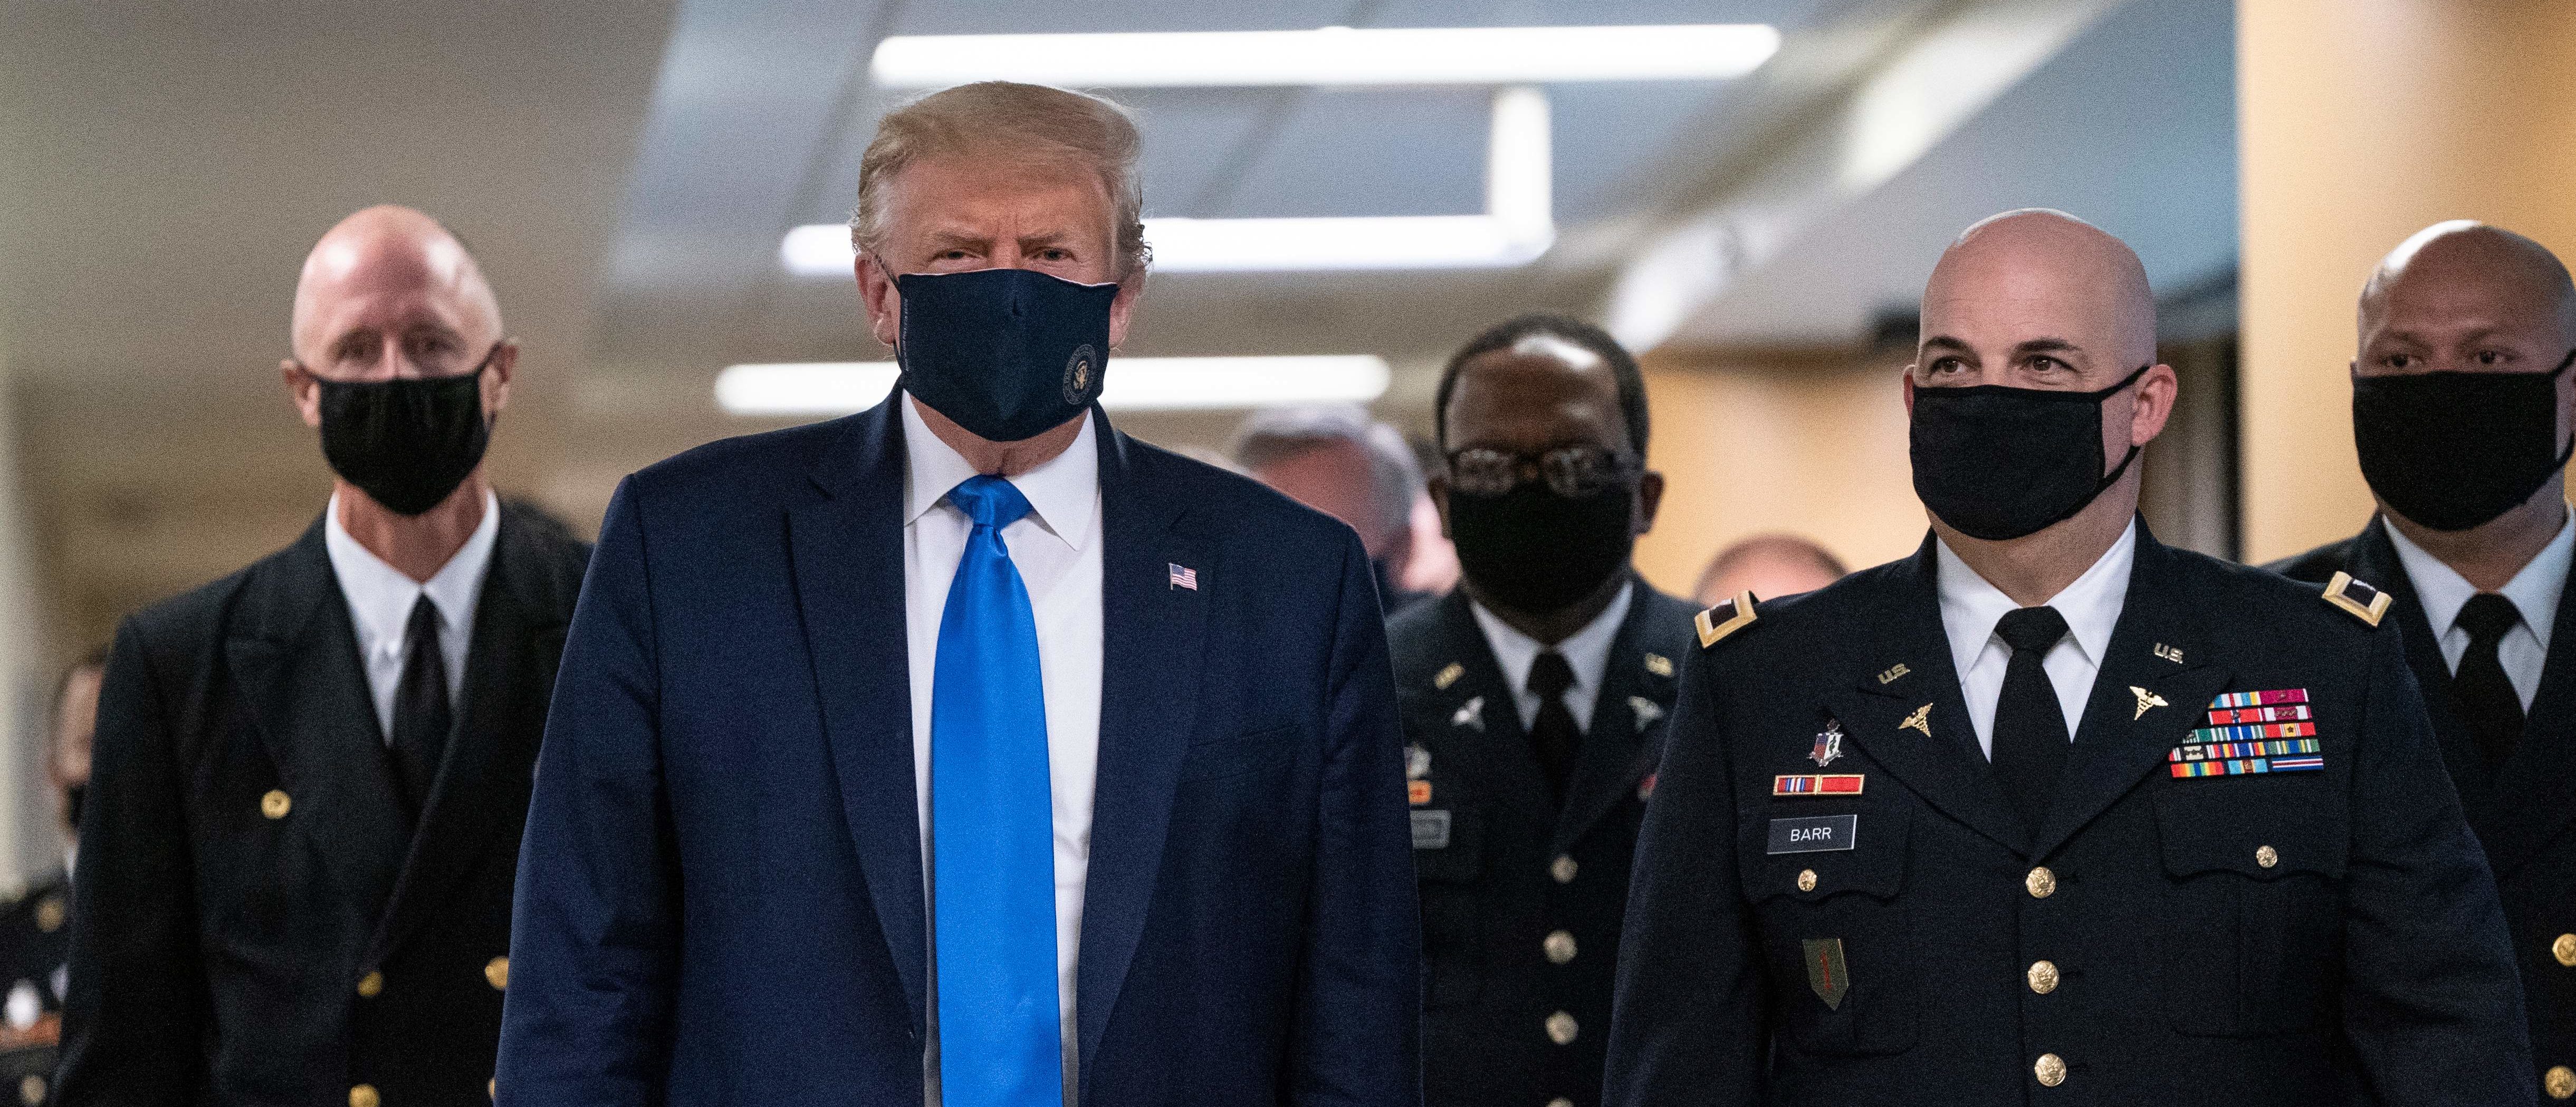 TOPSHOT - US President Donald Trump wears a mask as he visits Walter Reed National Military Medical Center in Bethesda, Maryland' on July 11, 2020. (Photo by ALEX EDELMAN/AFP via Getty Images)